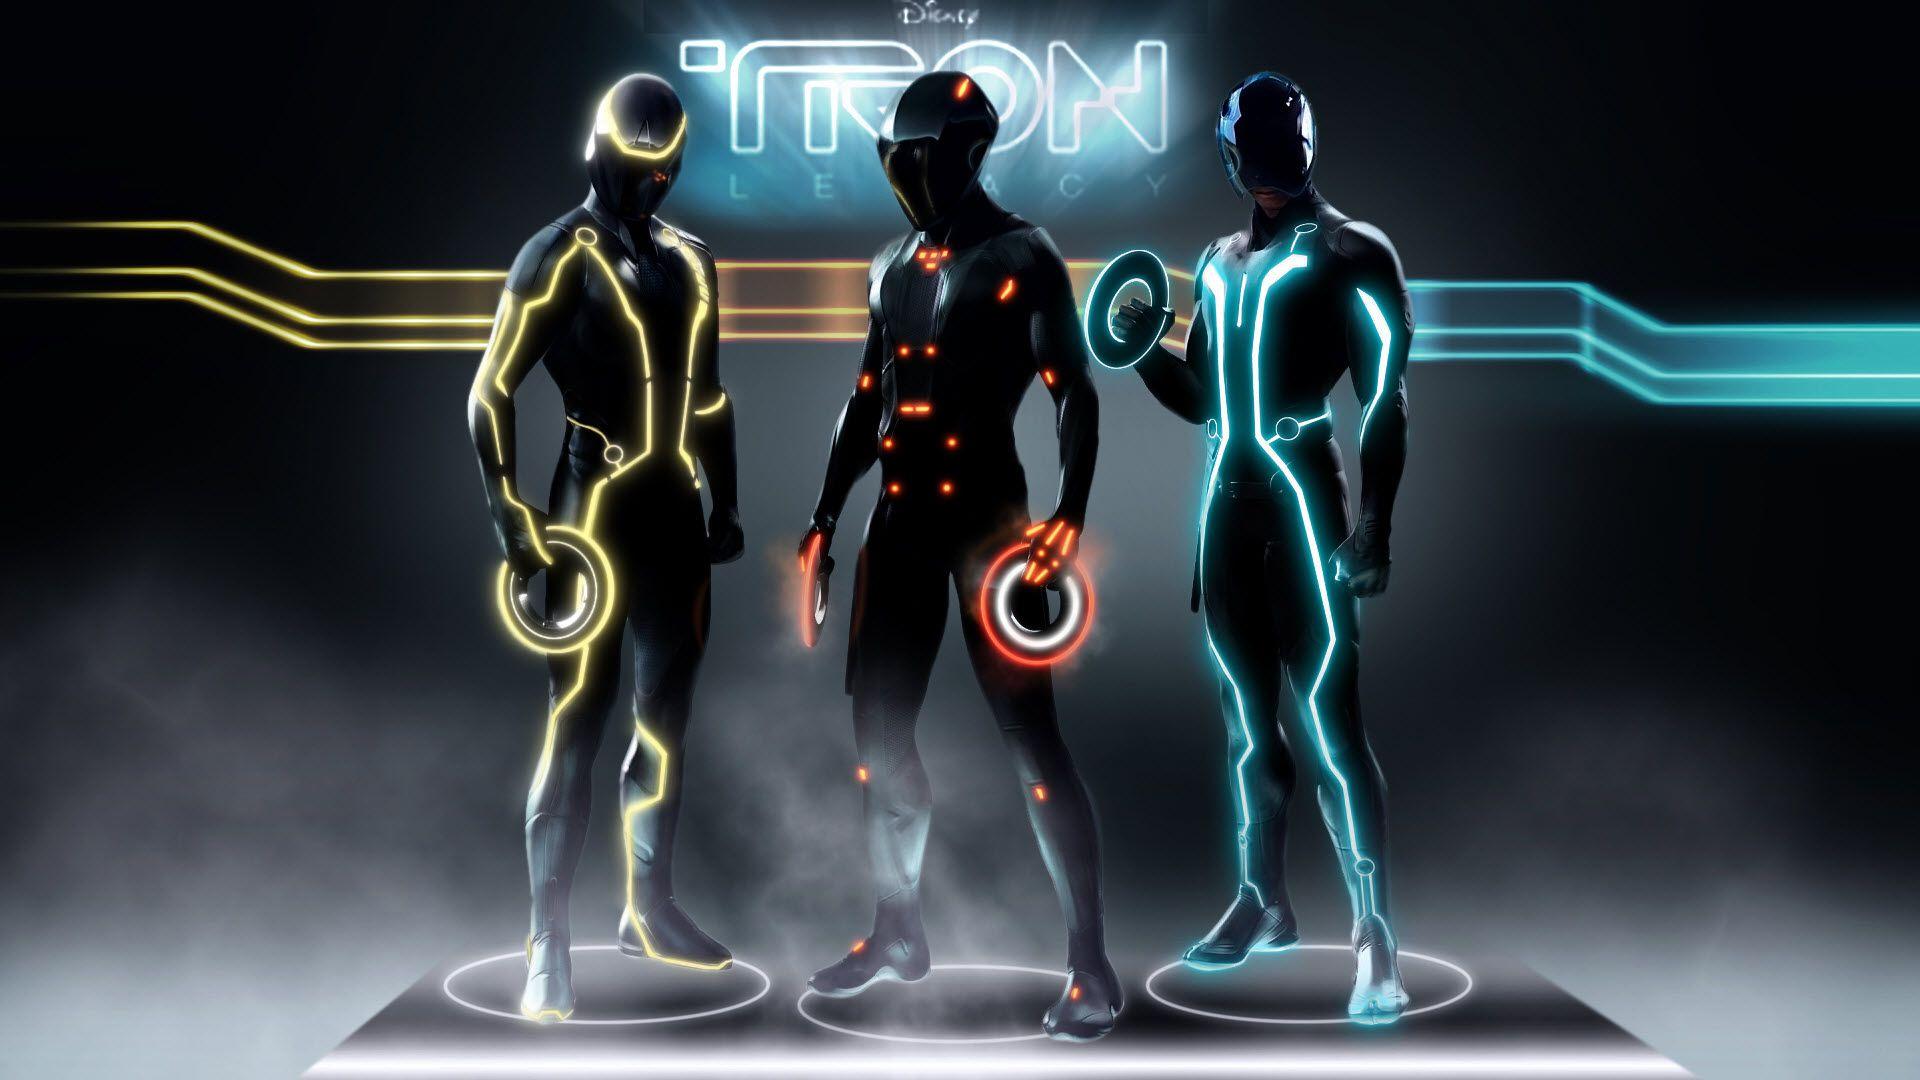 Tron Legacy Wallpaper, 34 PC Tron Legacy Photo in Excellent